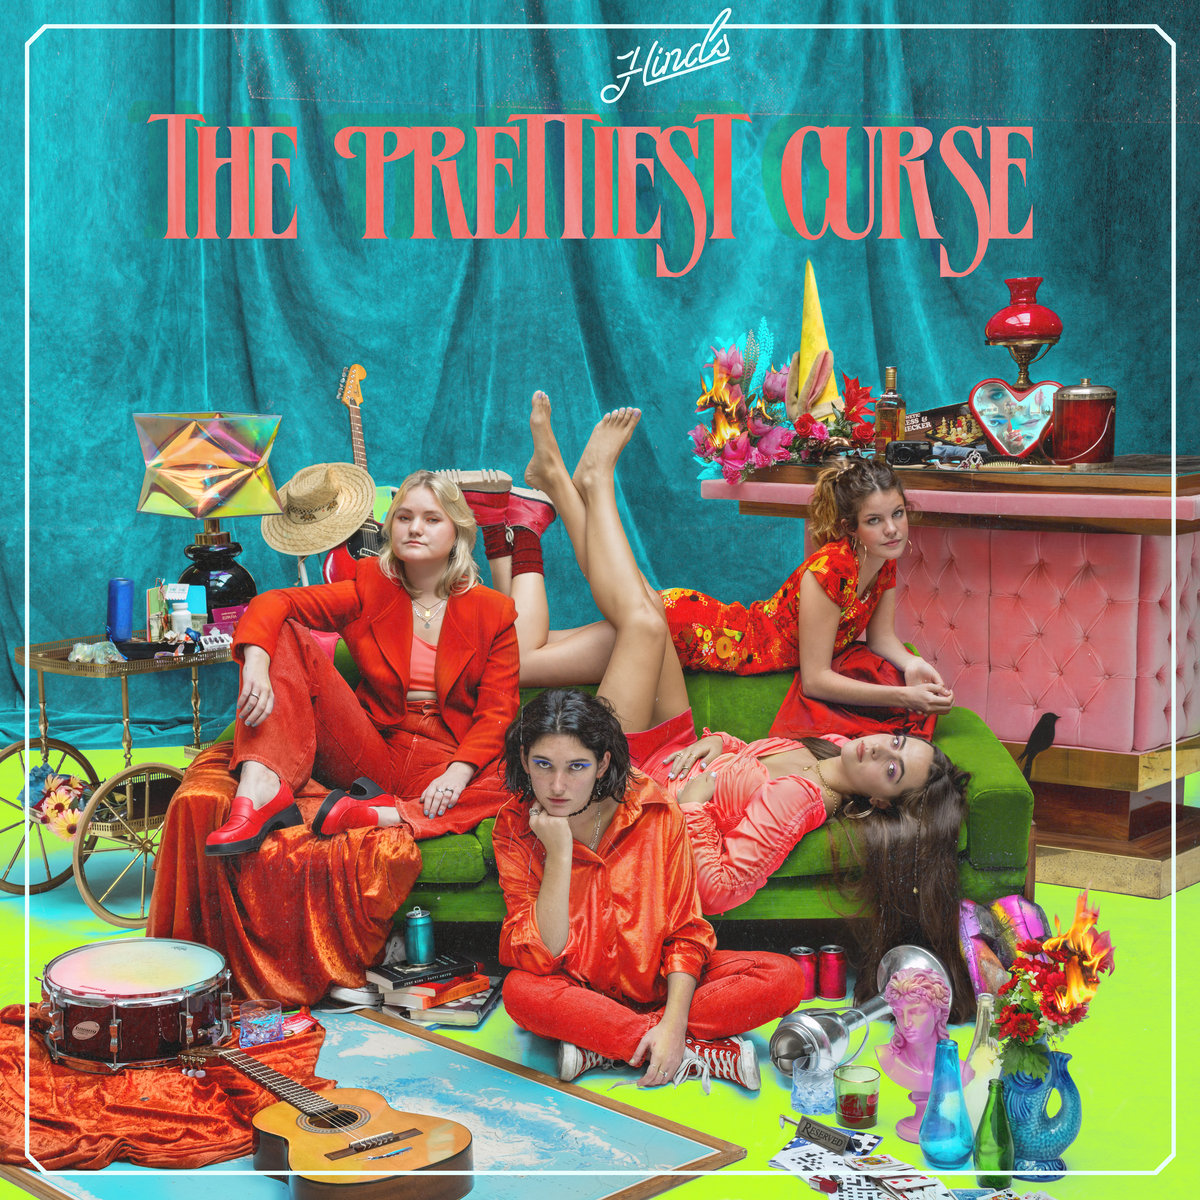 Hinds "The Prettiest Curse" LP